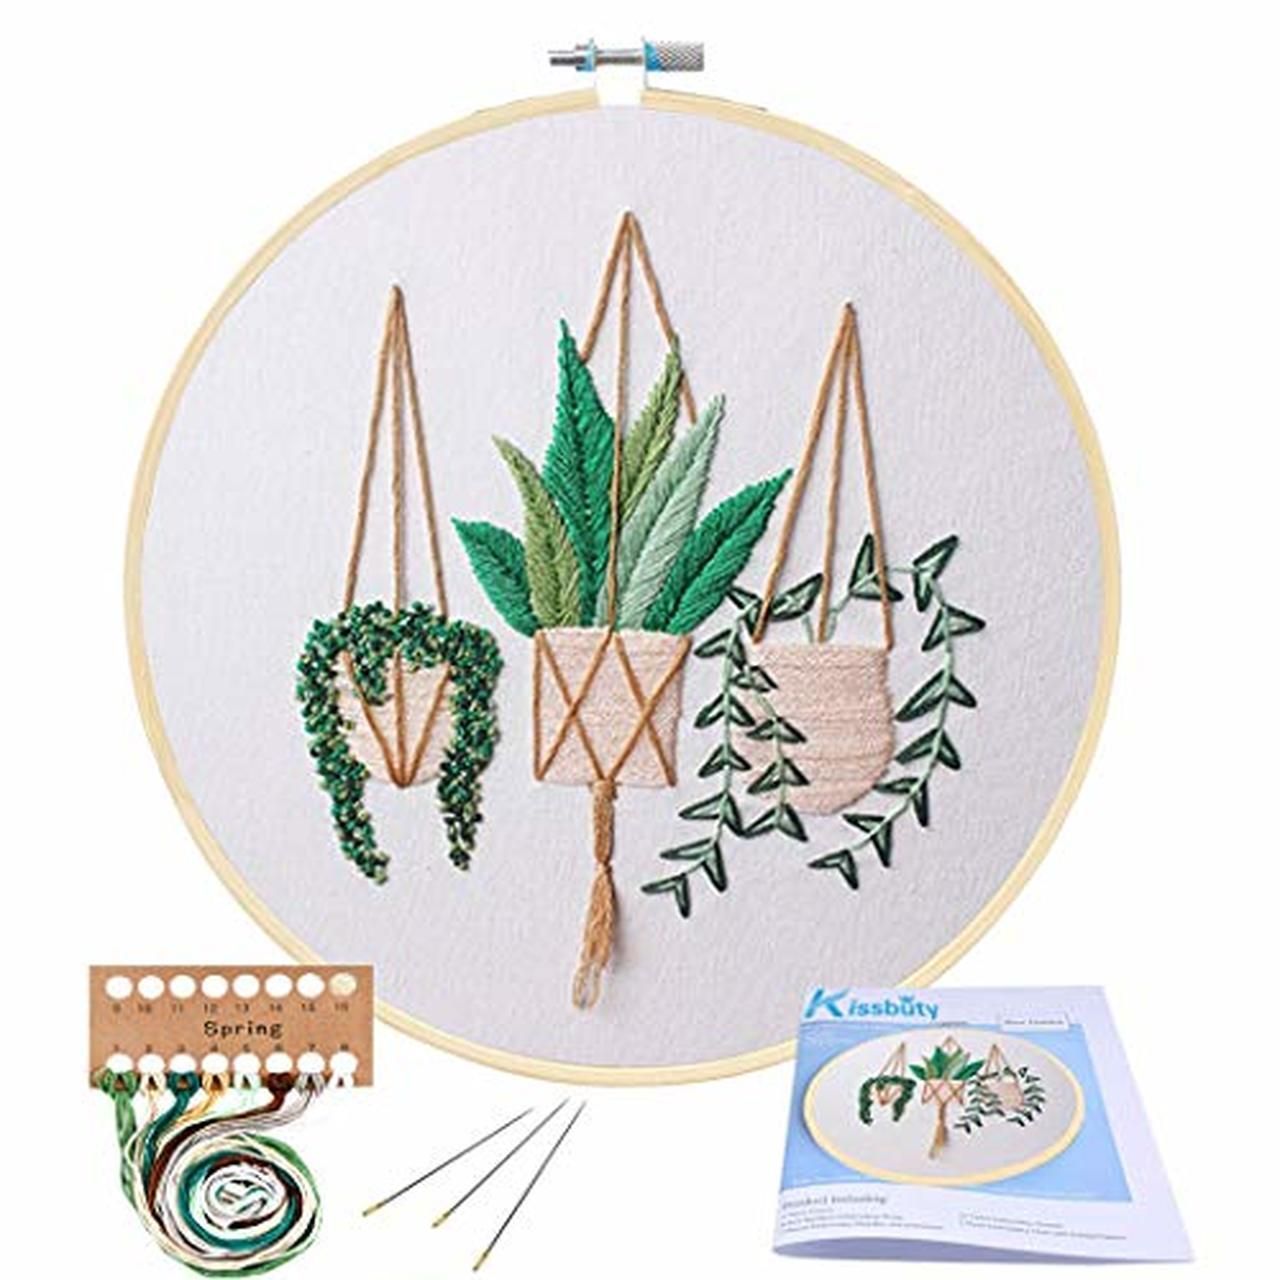 Full Range of Embroidery Starter Kit with Pattern, Kissbuty Cross Stitch Kit Including Embroidery Cloth with Plant Pattern, Bamboo Embroidery Hoop, Color Threads and Tools Kit (Epipremnum Aureum) -   14 plants Pattern clothes ideas